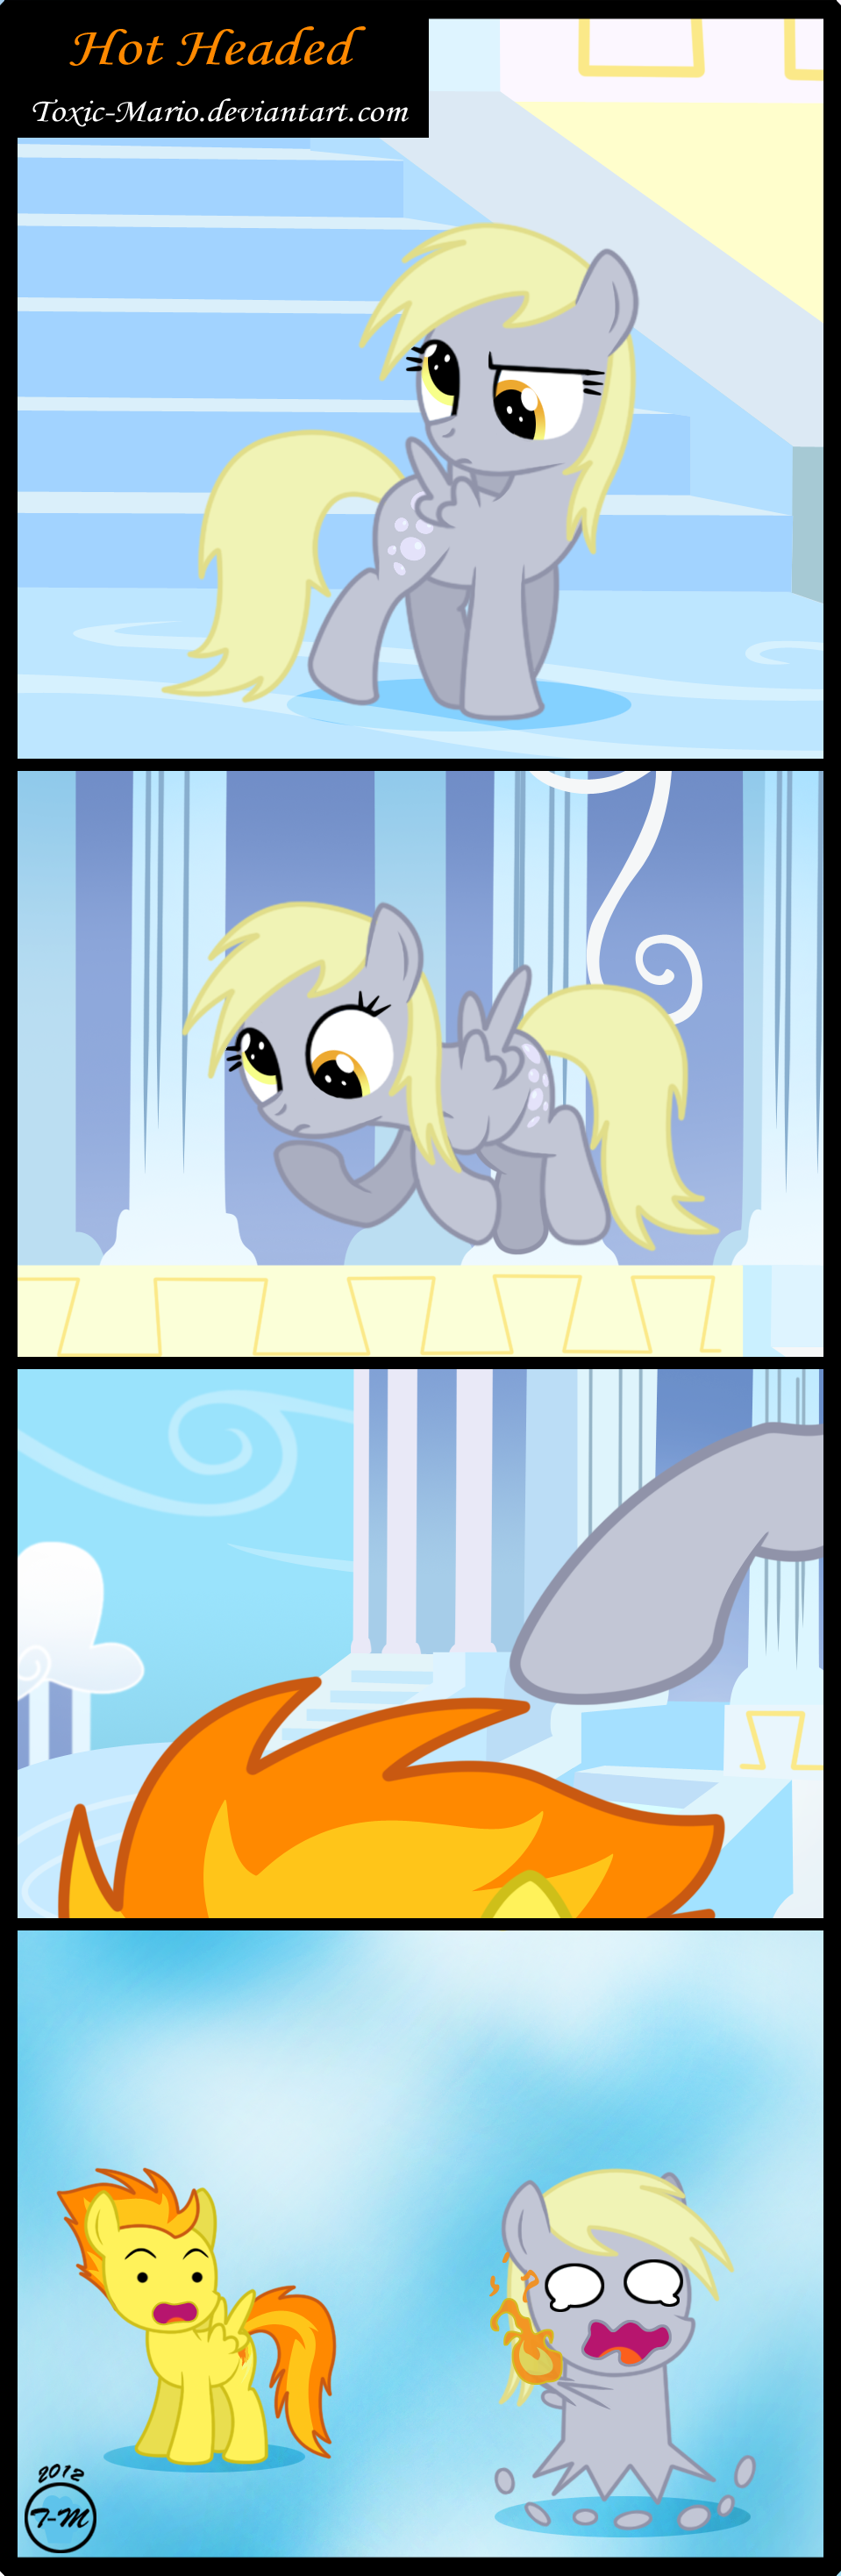 blonde_hair comic cub cutie_mark derpy_hooves_(mlp) equine female feral fire flying friendship_is_magic fur grey_fur hair horse mammal my_little_pony pegasus pony spitfire_(mlp) toxic-mario two_tone_hair wings wonderbolts_(mlp) yellow_fur young